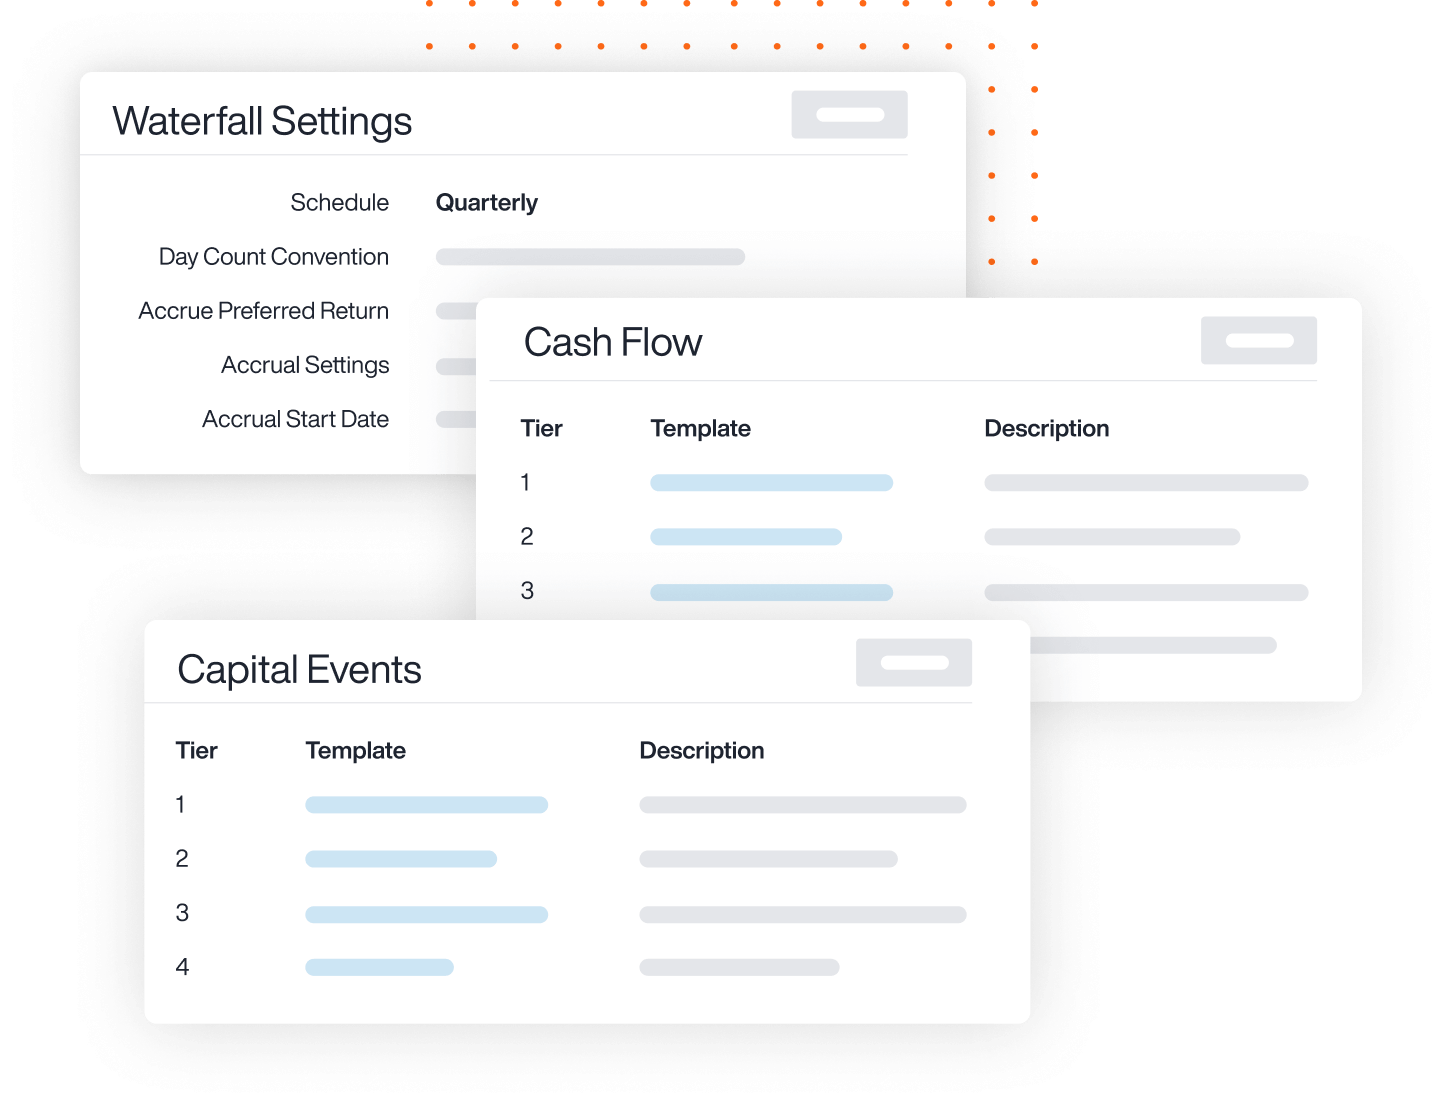 AppFolio Investment Management interface windows of Waterfall Settings, Cash Flow, and Capital Events, with an orange dotted rectangle shape in the background.